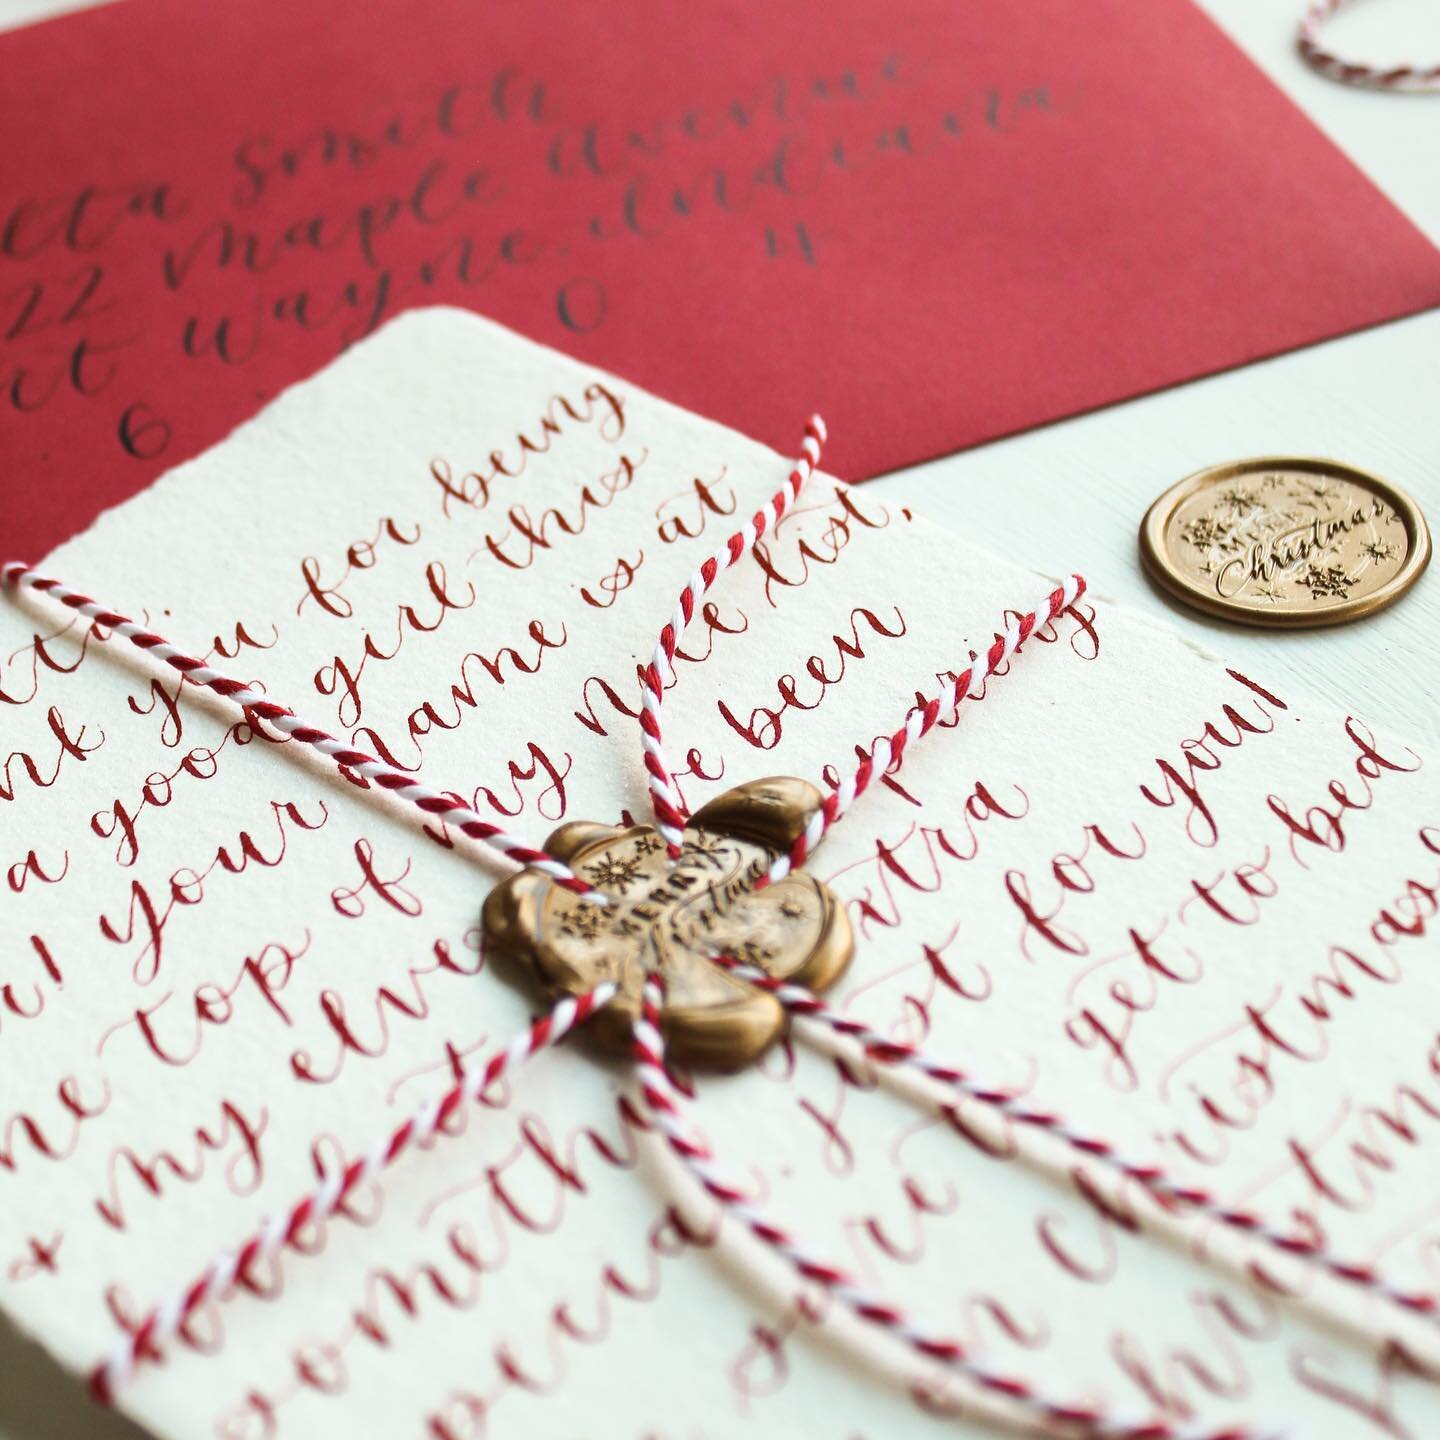 Today&rsquo;s item added to the 2021 Holiday Shop is Handwritten Letters from Santa!🎅🏼

Relive the magic in your child&rsquo;s eyes by gifting them a handwritten, personalized letter from Santa Claus🤍 Each letter comes with intricate finishing tou